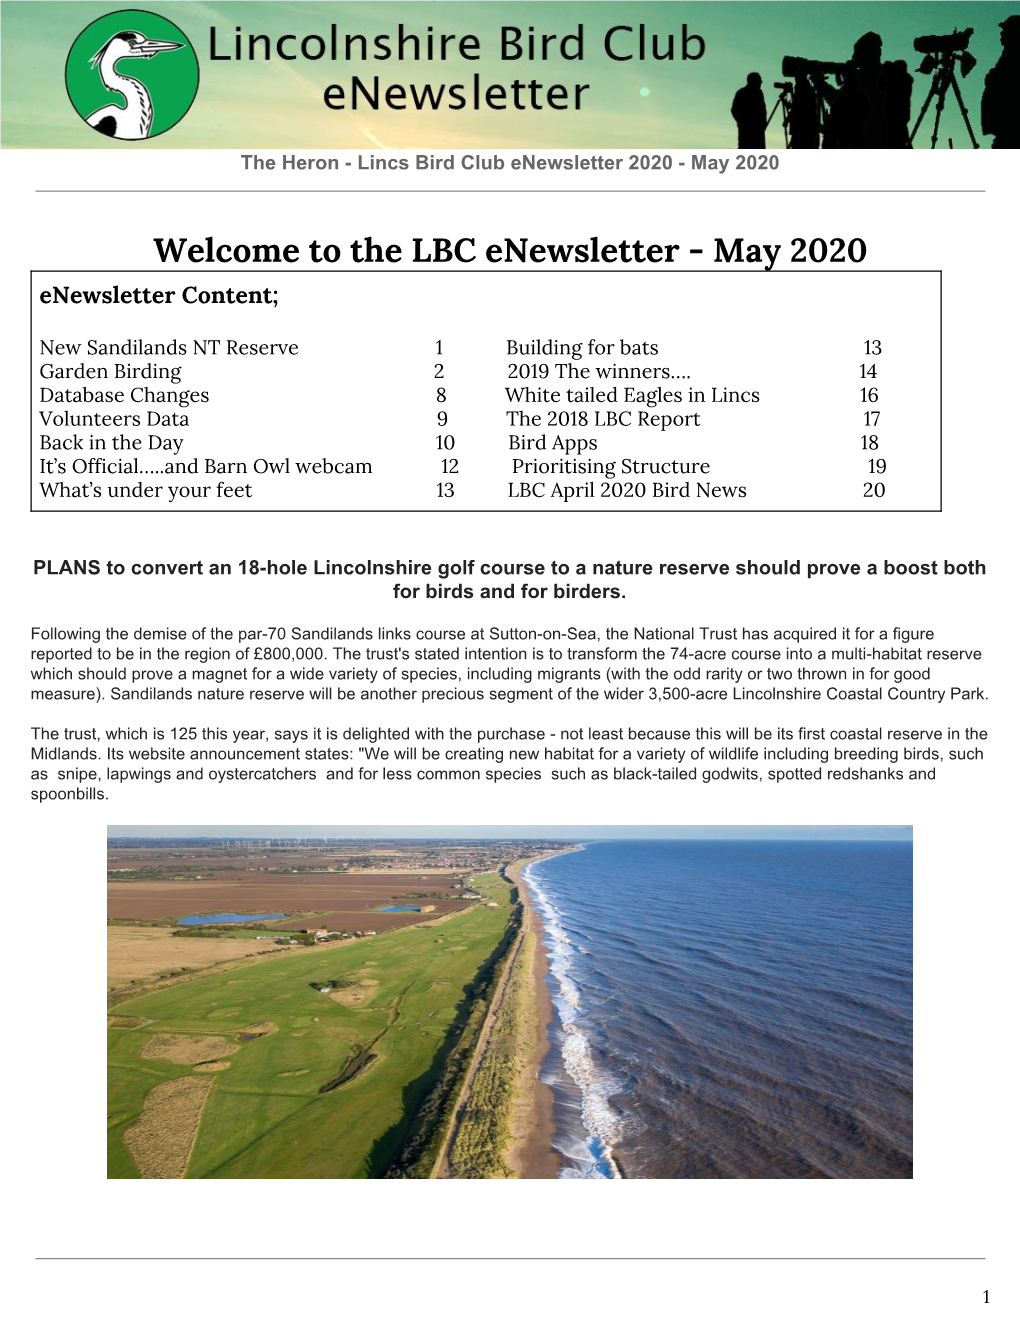 Welcome to the LBC Enewsletter - May 2020 Enewsletter Content;